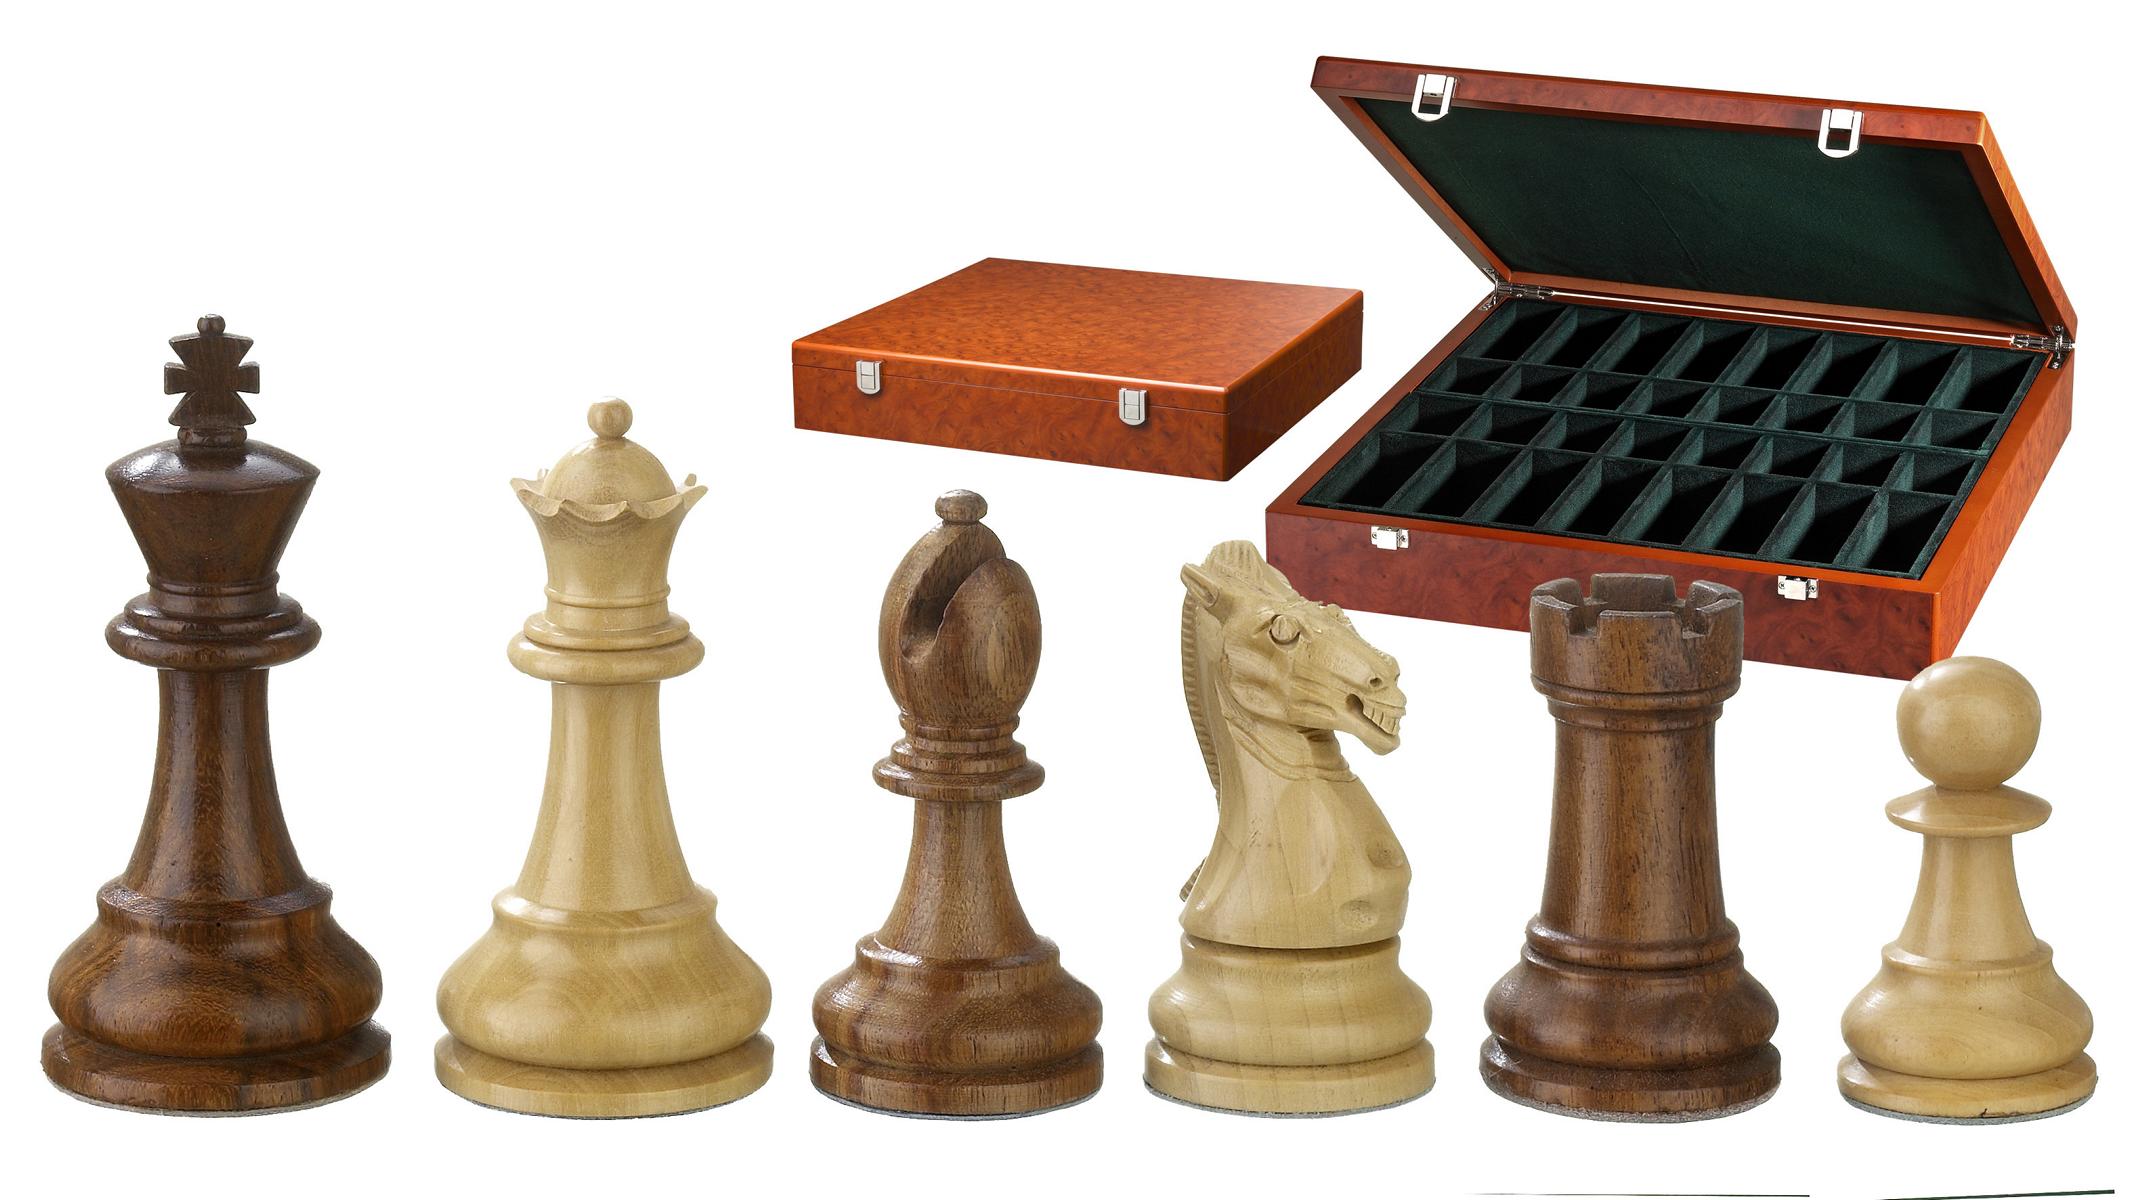 Chess pieces Karl der Große, king height 95 mm, in wooden box